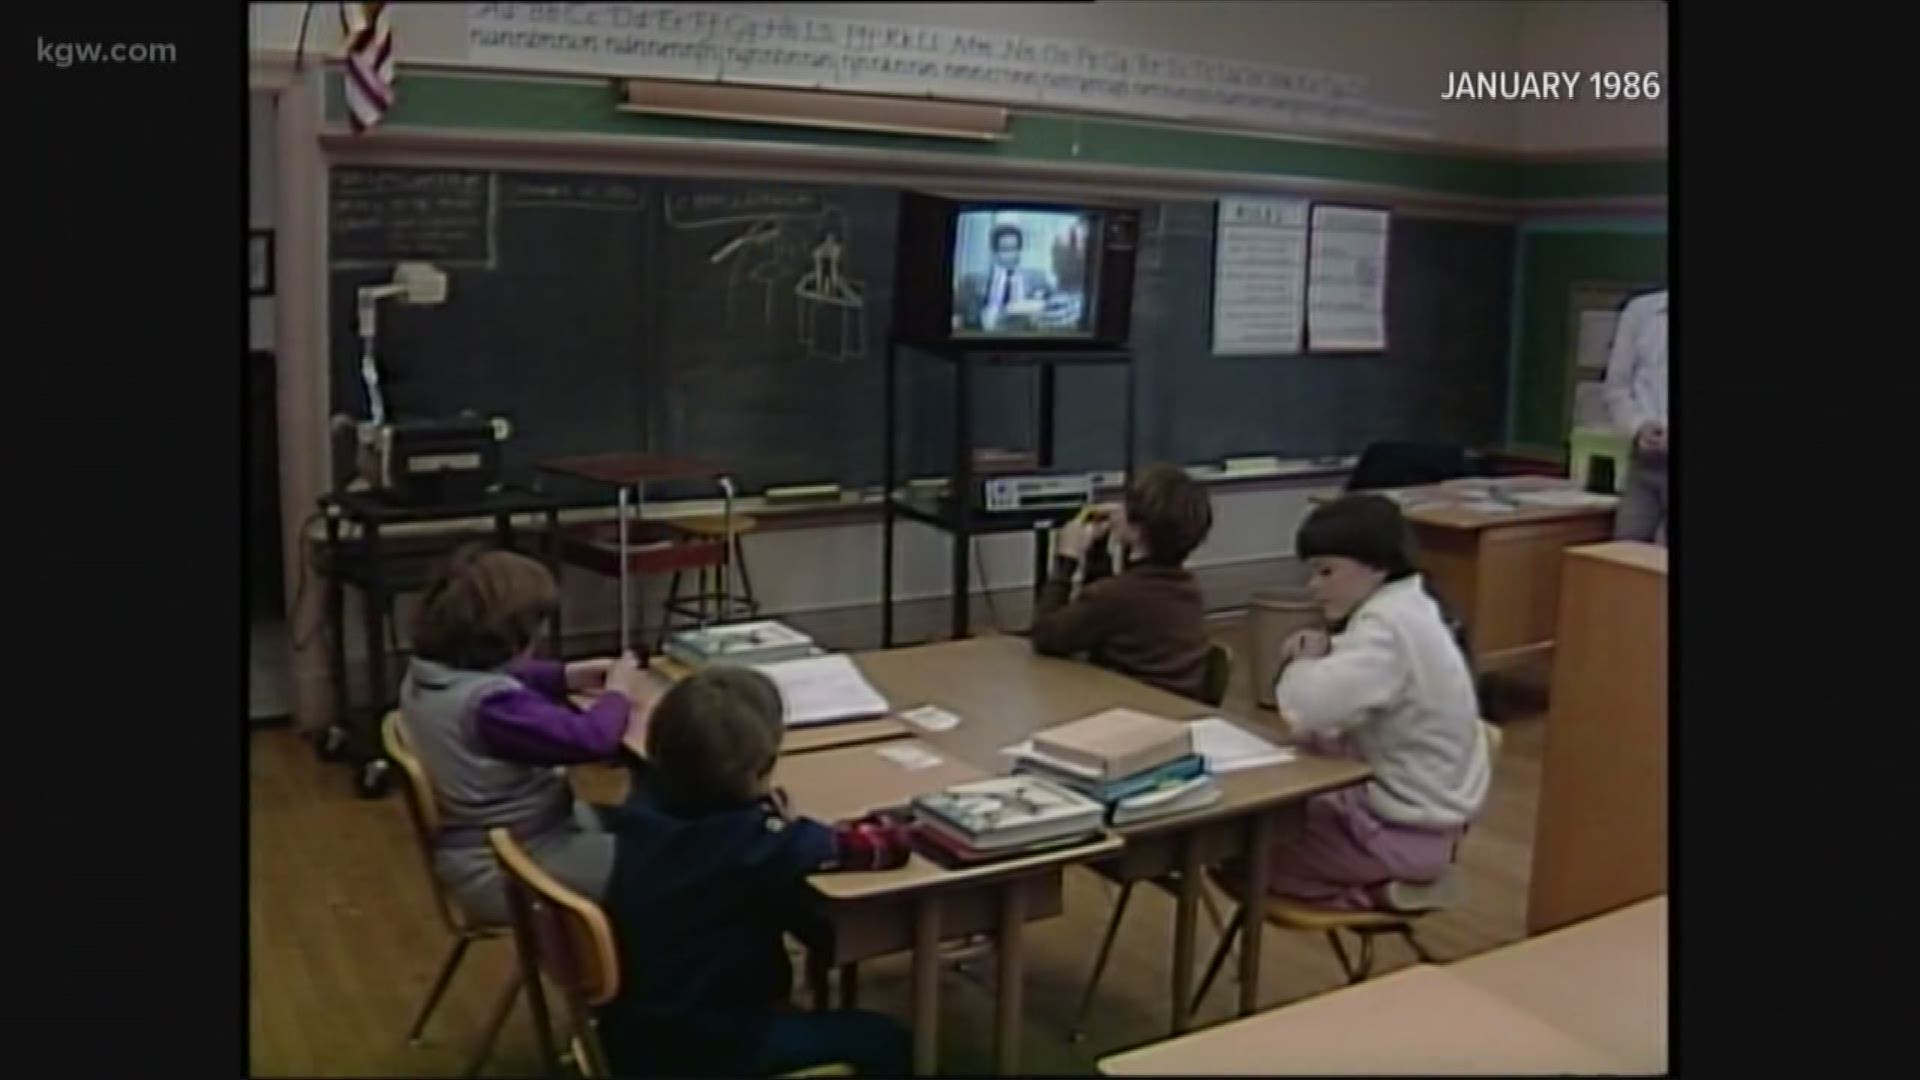 34 years ago the Challenger disaster happened. This KGW archive footage from 1986 shows how students reacted right after the crash.